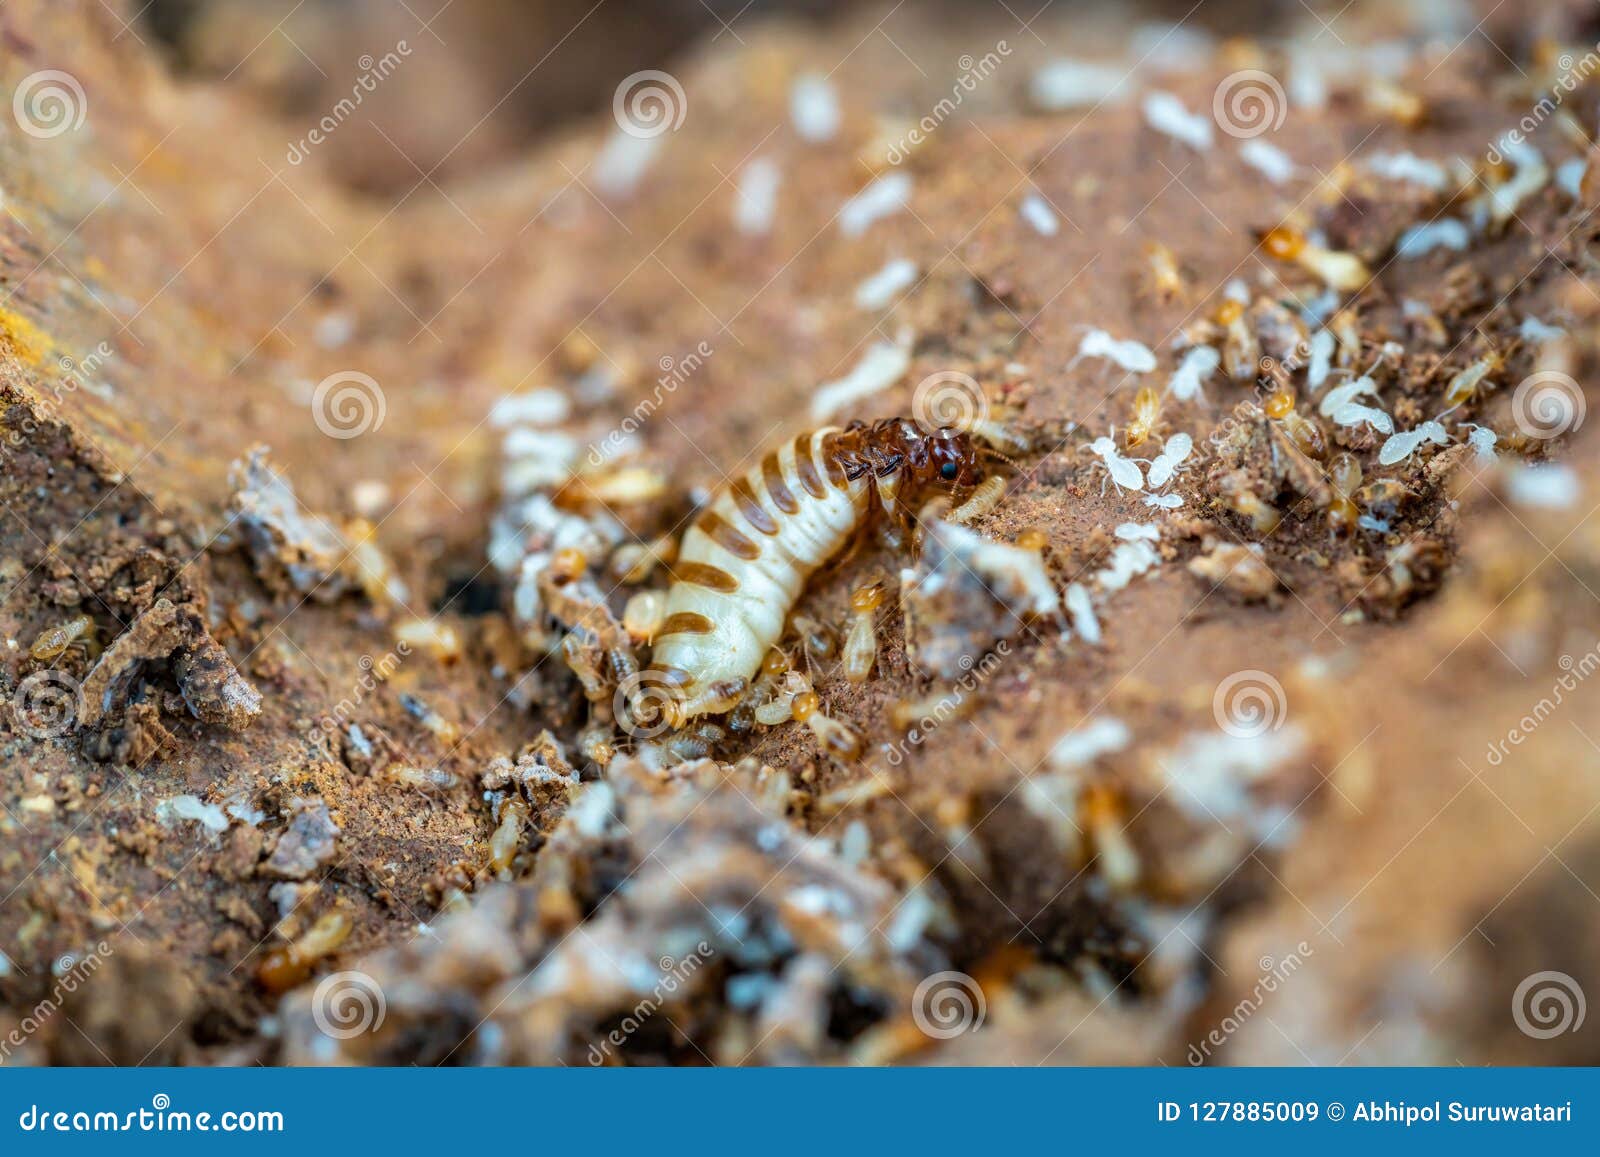 acro shot of the queen termite and termites in a hole. termite queens have the longest lifespan of any insect in the world, s